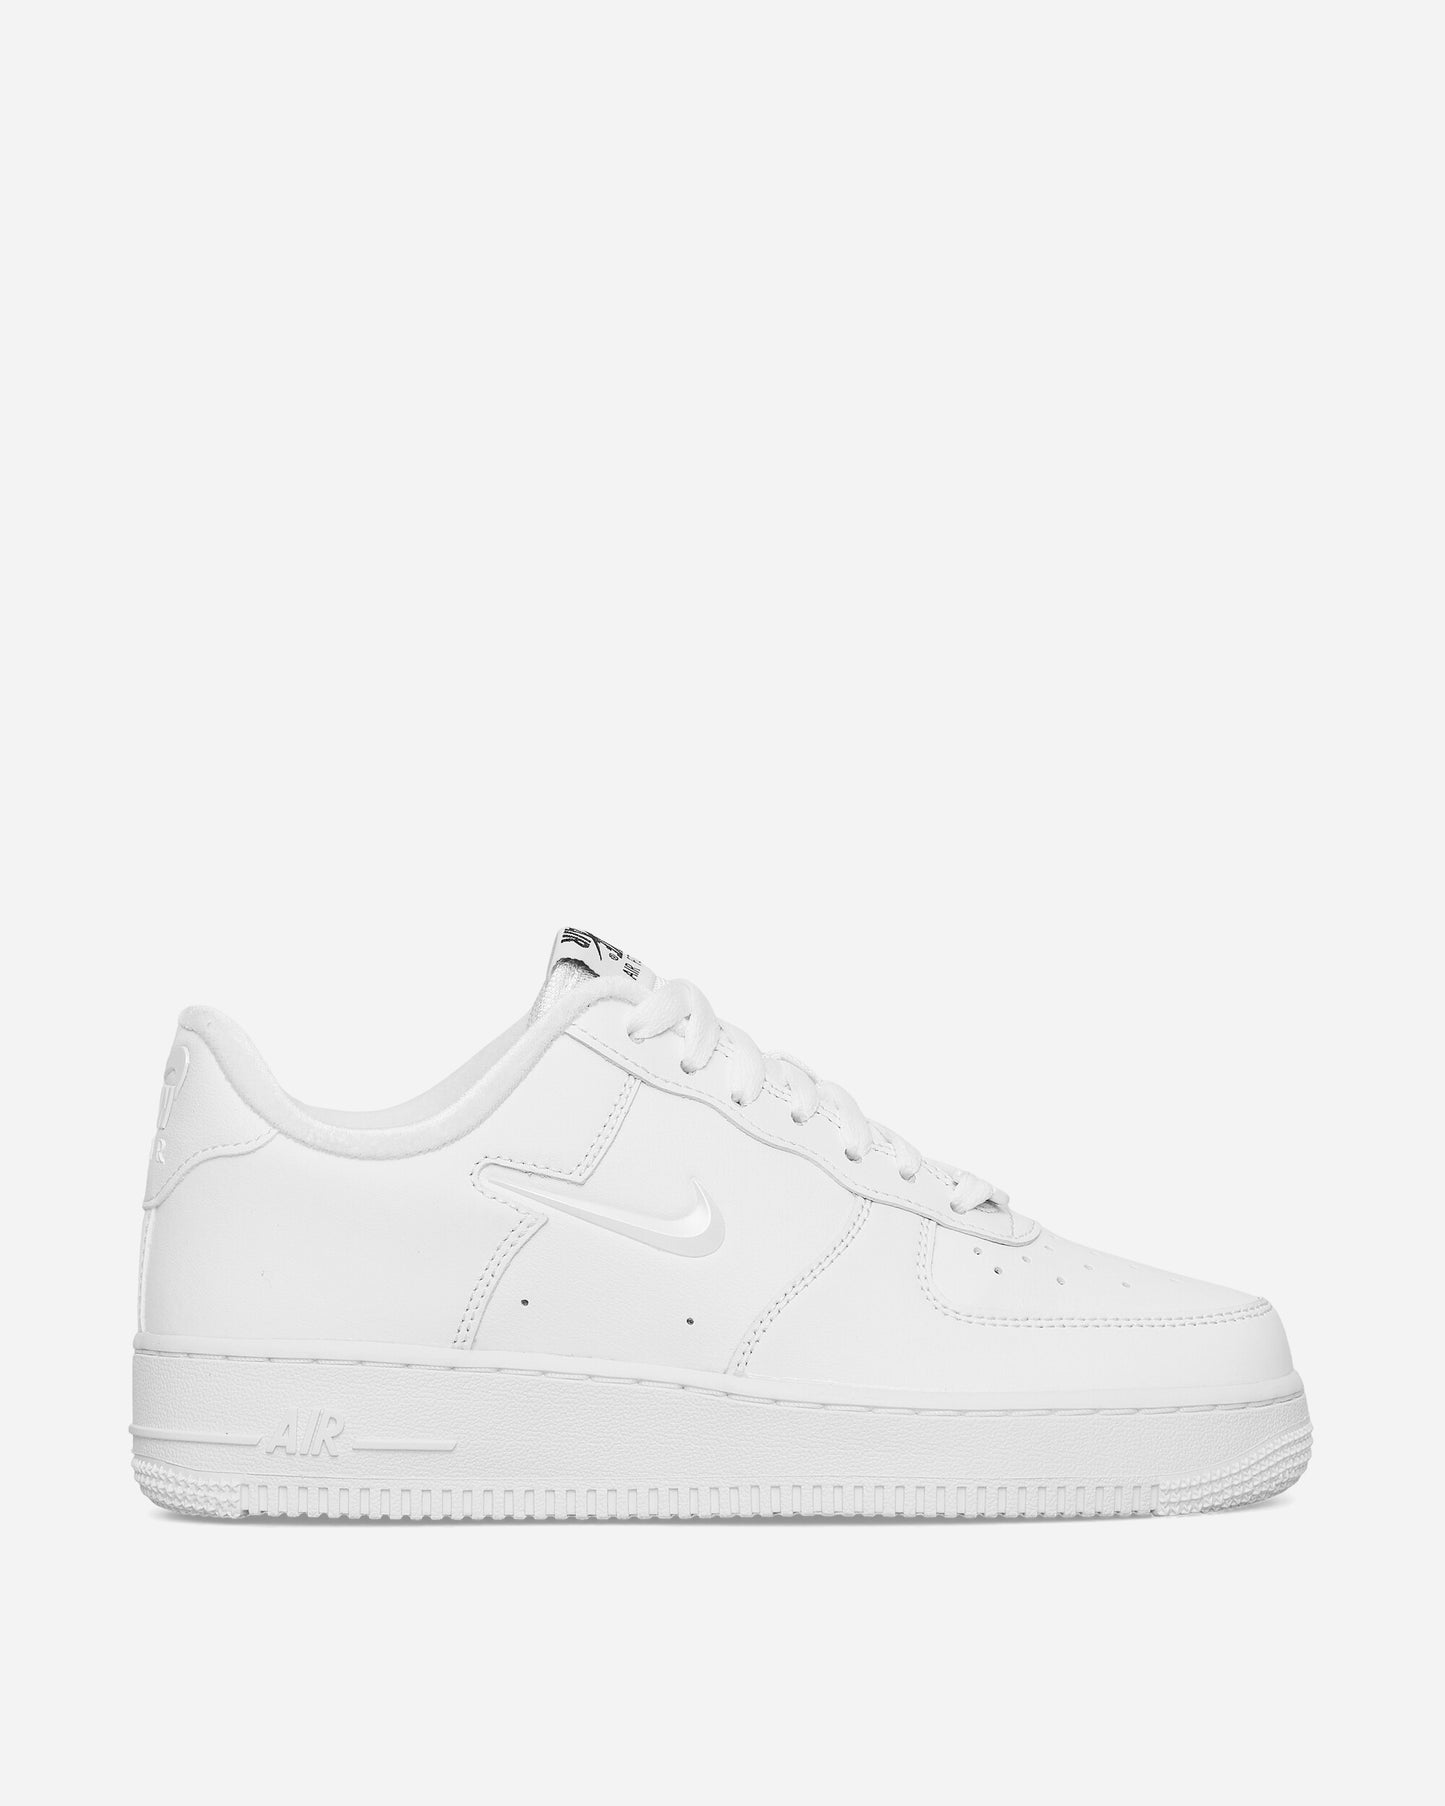 Nike Wmns Air Force 1 '07 Se White/Multi/Color/Black Sneakers Low FB8251-100